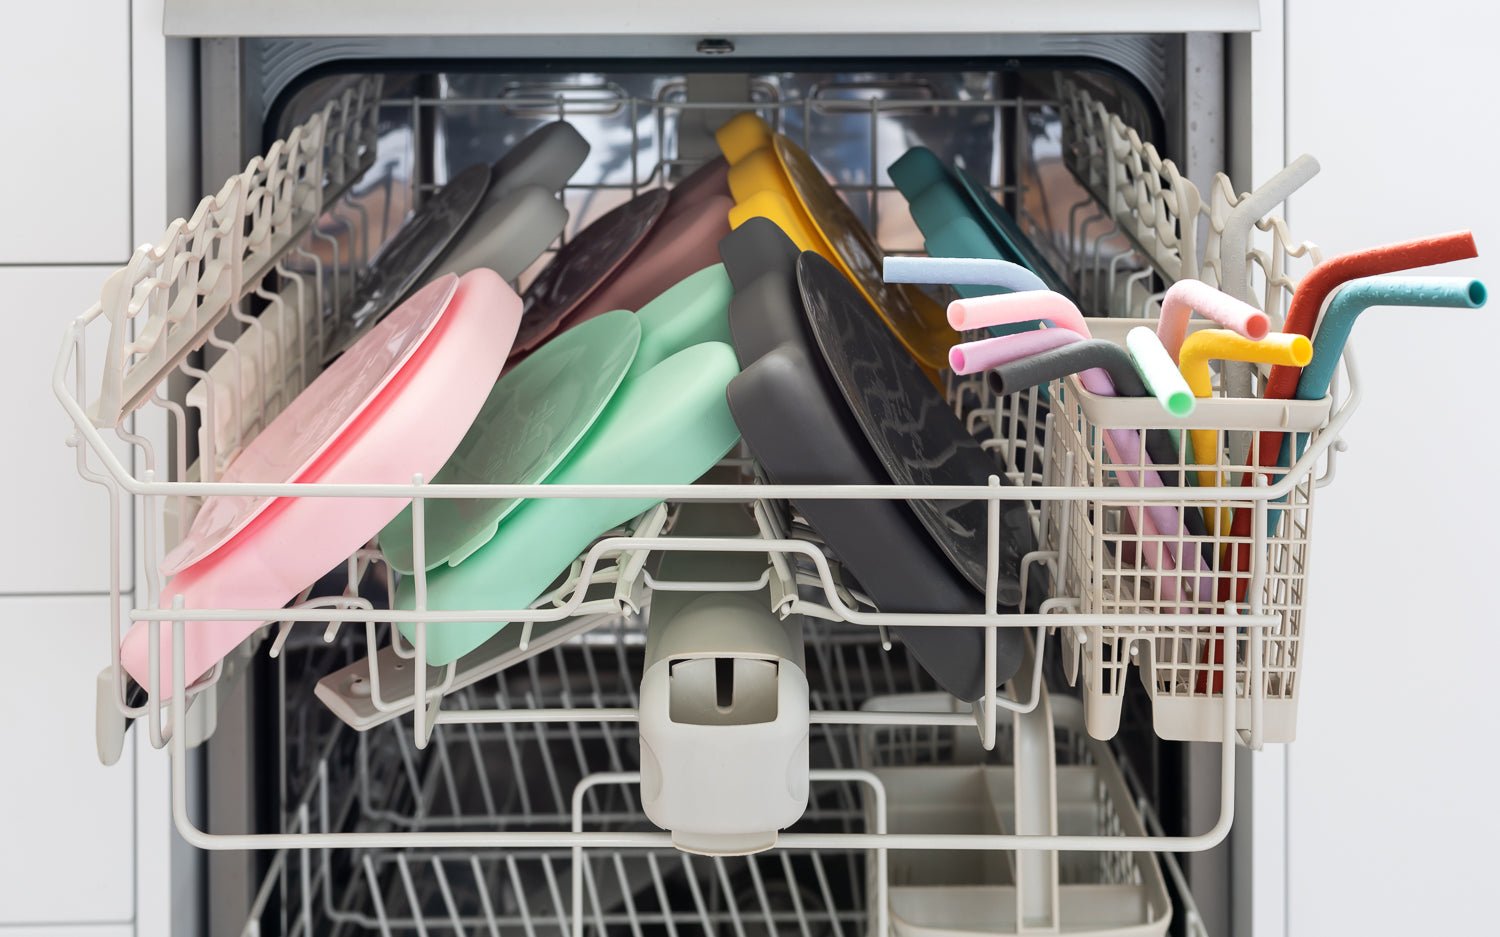 Silicone straws and suction plates in dishwasher